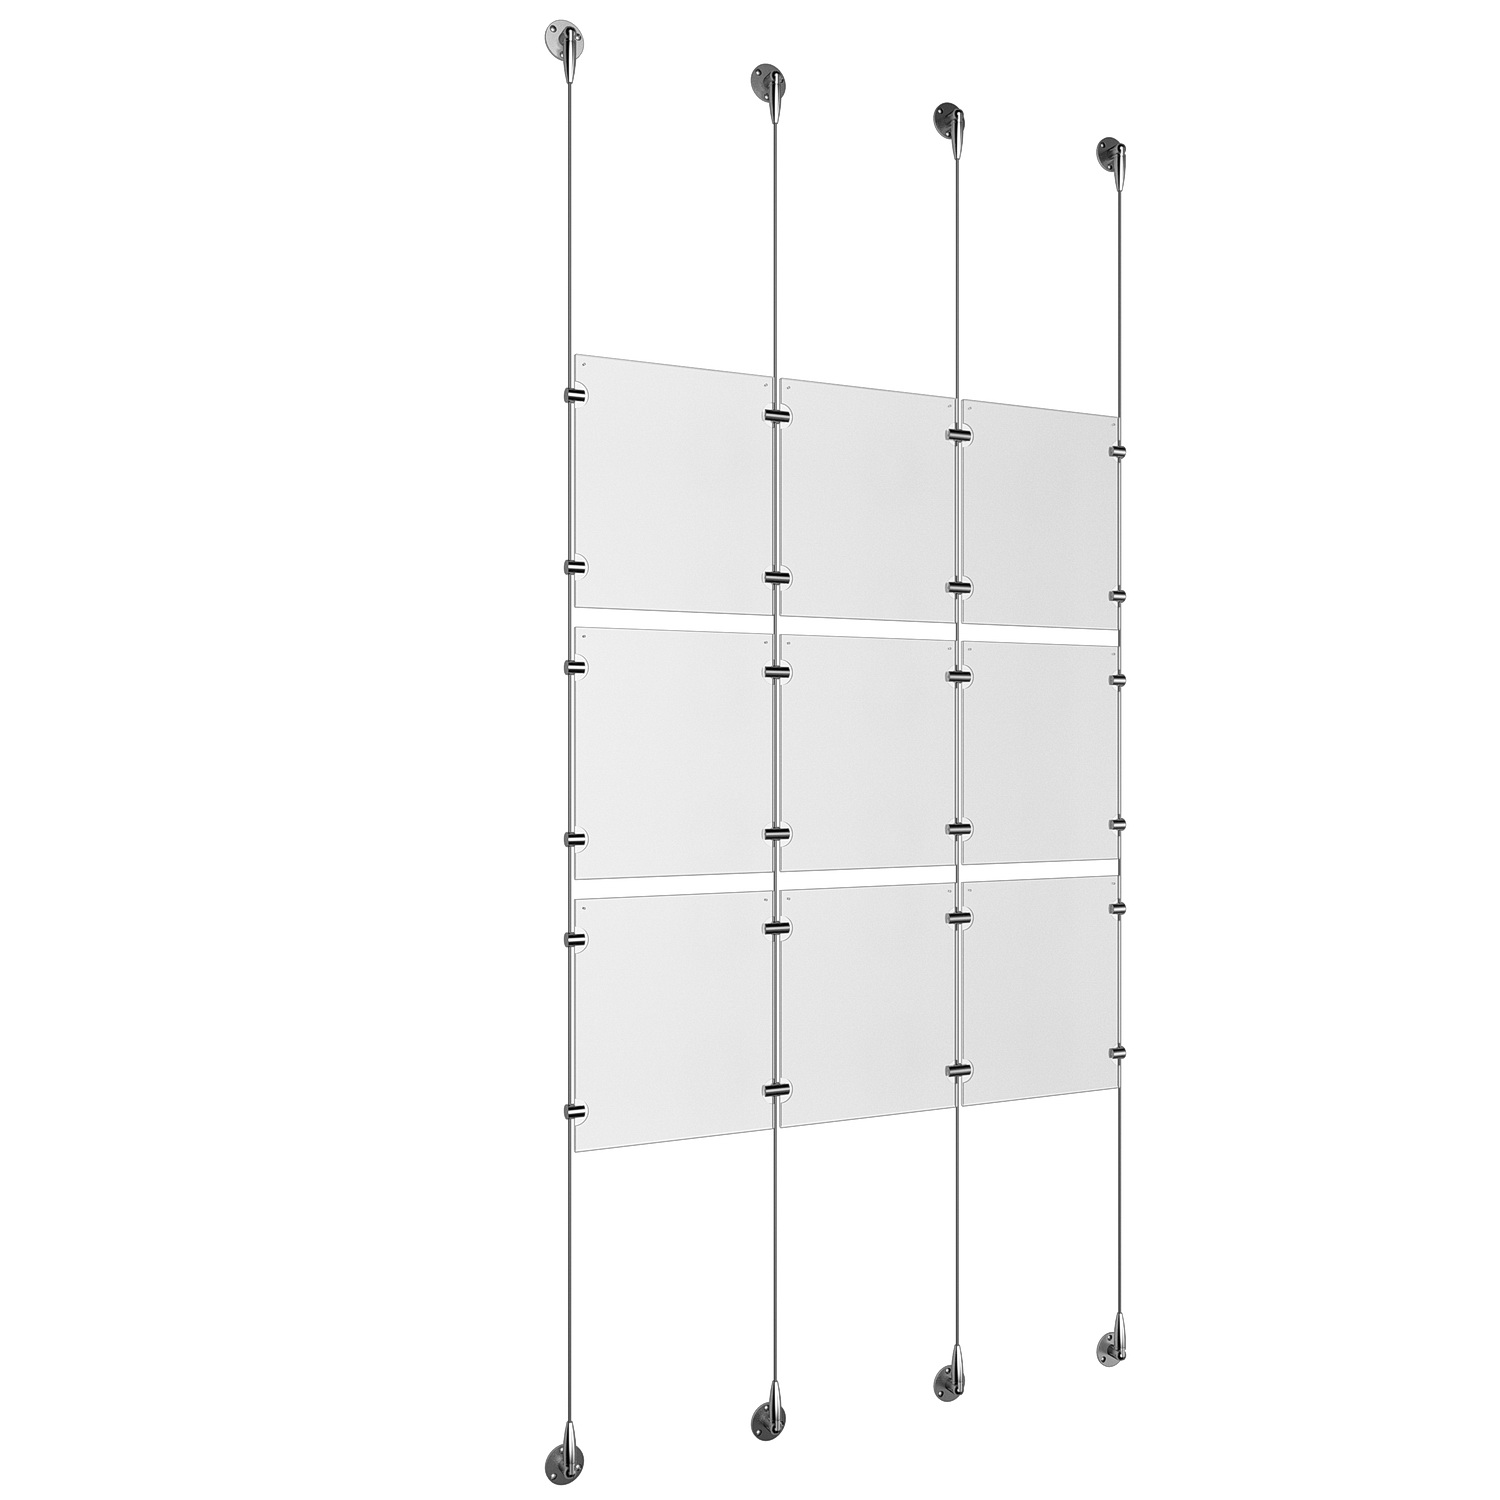 (9) 8-1/2'' Width x 11'' Height Clear Acrylic Frame & (4) Stainless Steel Satin Brushed Adjustable Angle Signature 1/8'' Cable Systems with (12) Single-Sided Panel Grippers (12) Double-Sided Panel Grippers